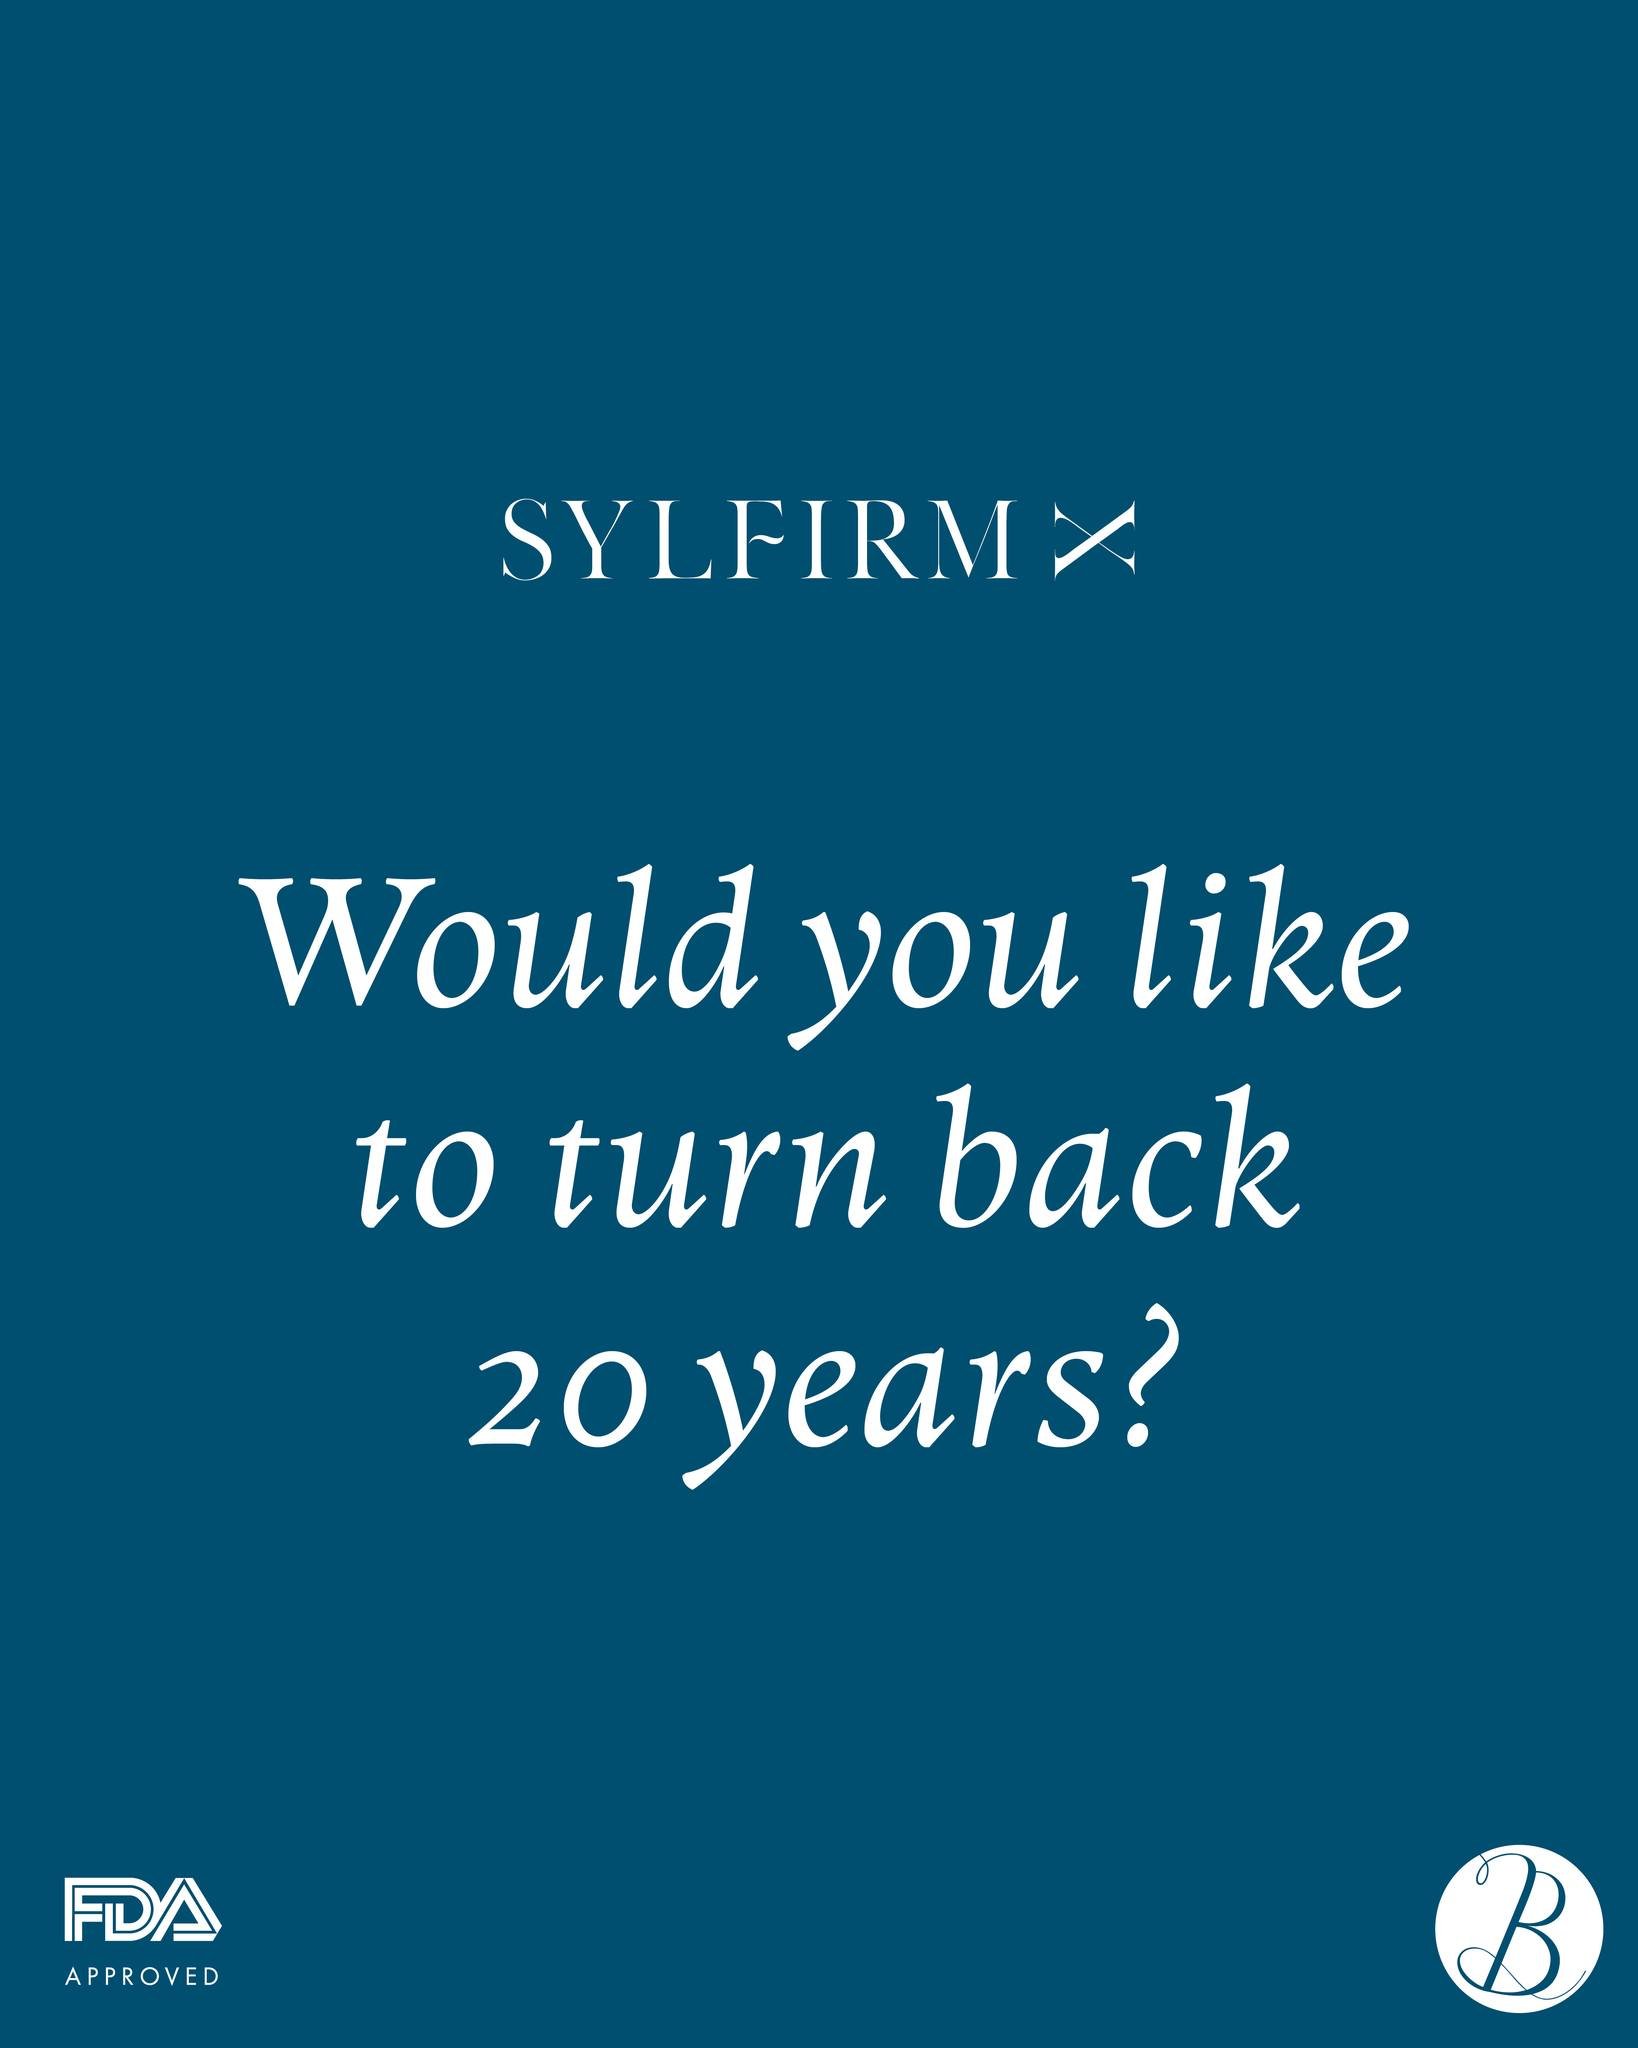 The Beauty House is excited to now offer Sylfirm X.

This procedure uses innovative SR3 Technology (RP), the latest SMART generation tech that selectively treats the skin using Regional Regeneration Radio Repeated Pulse.

As one of it&rsquo;s many be